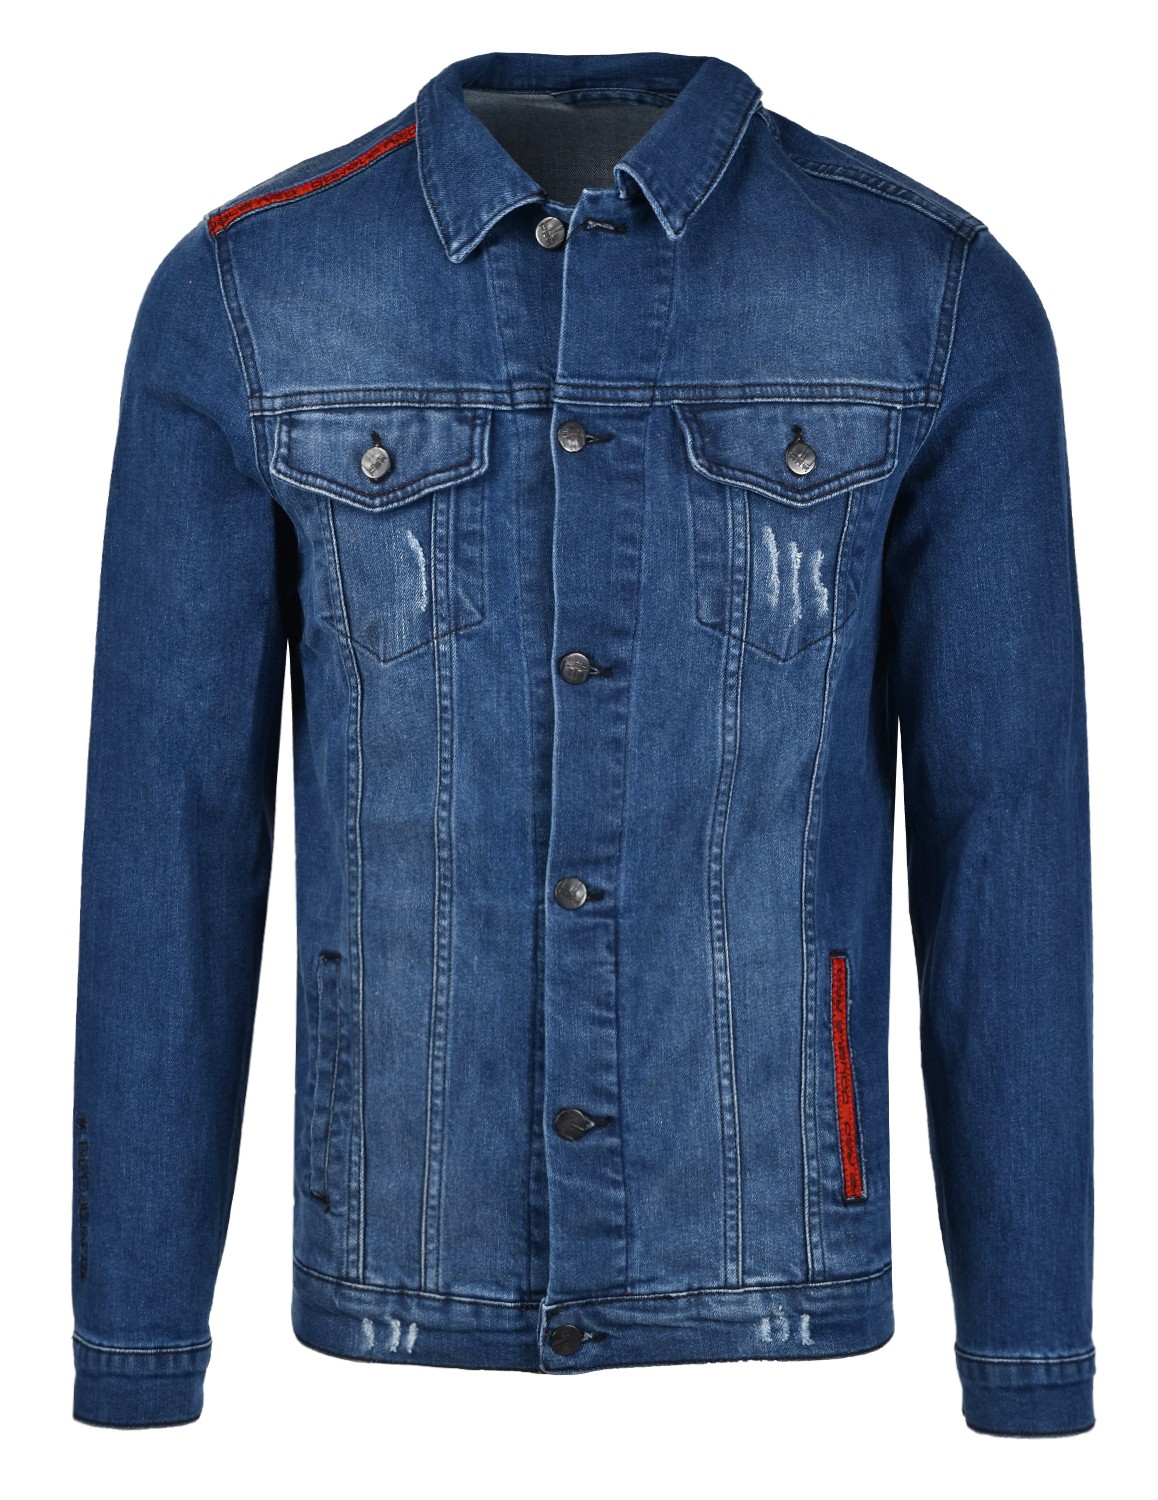 RED HERO All Logo Jeans Jacket